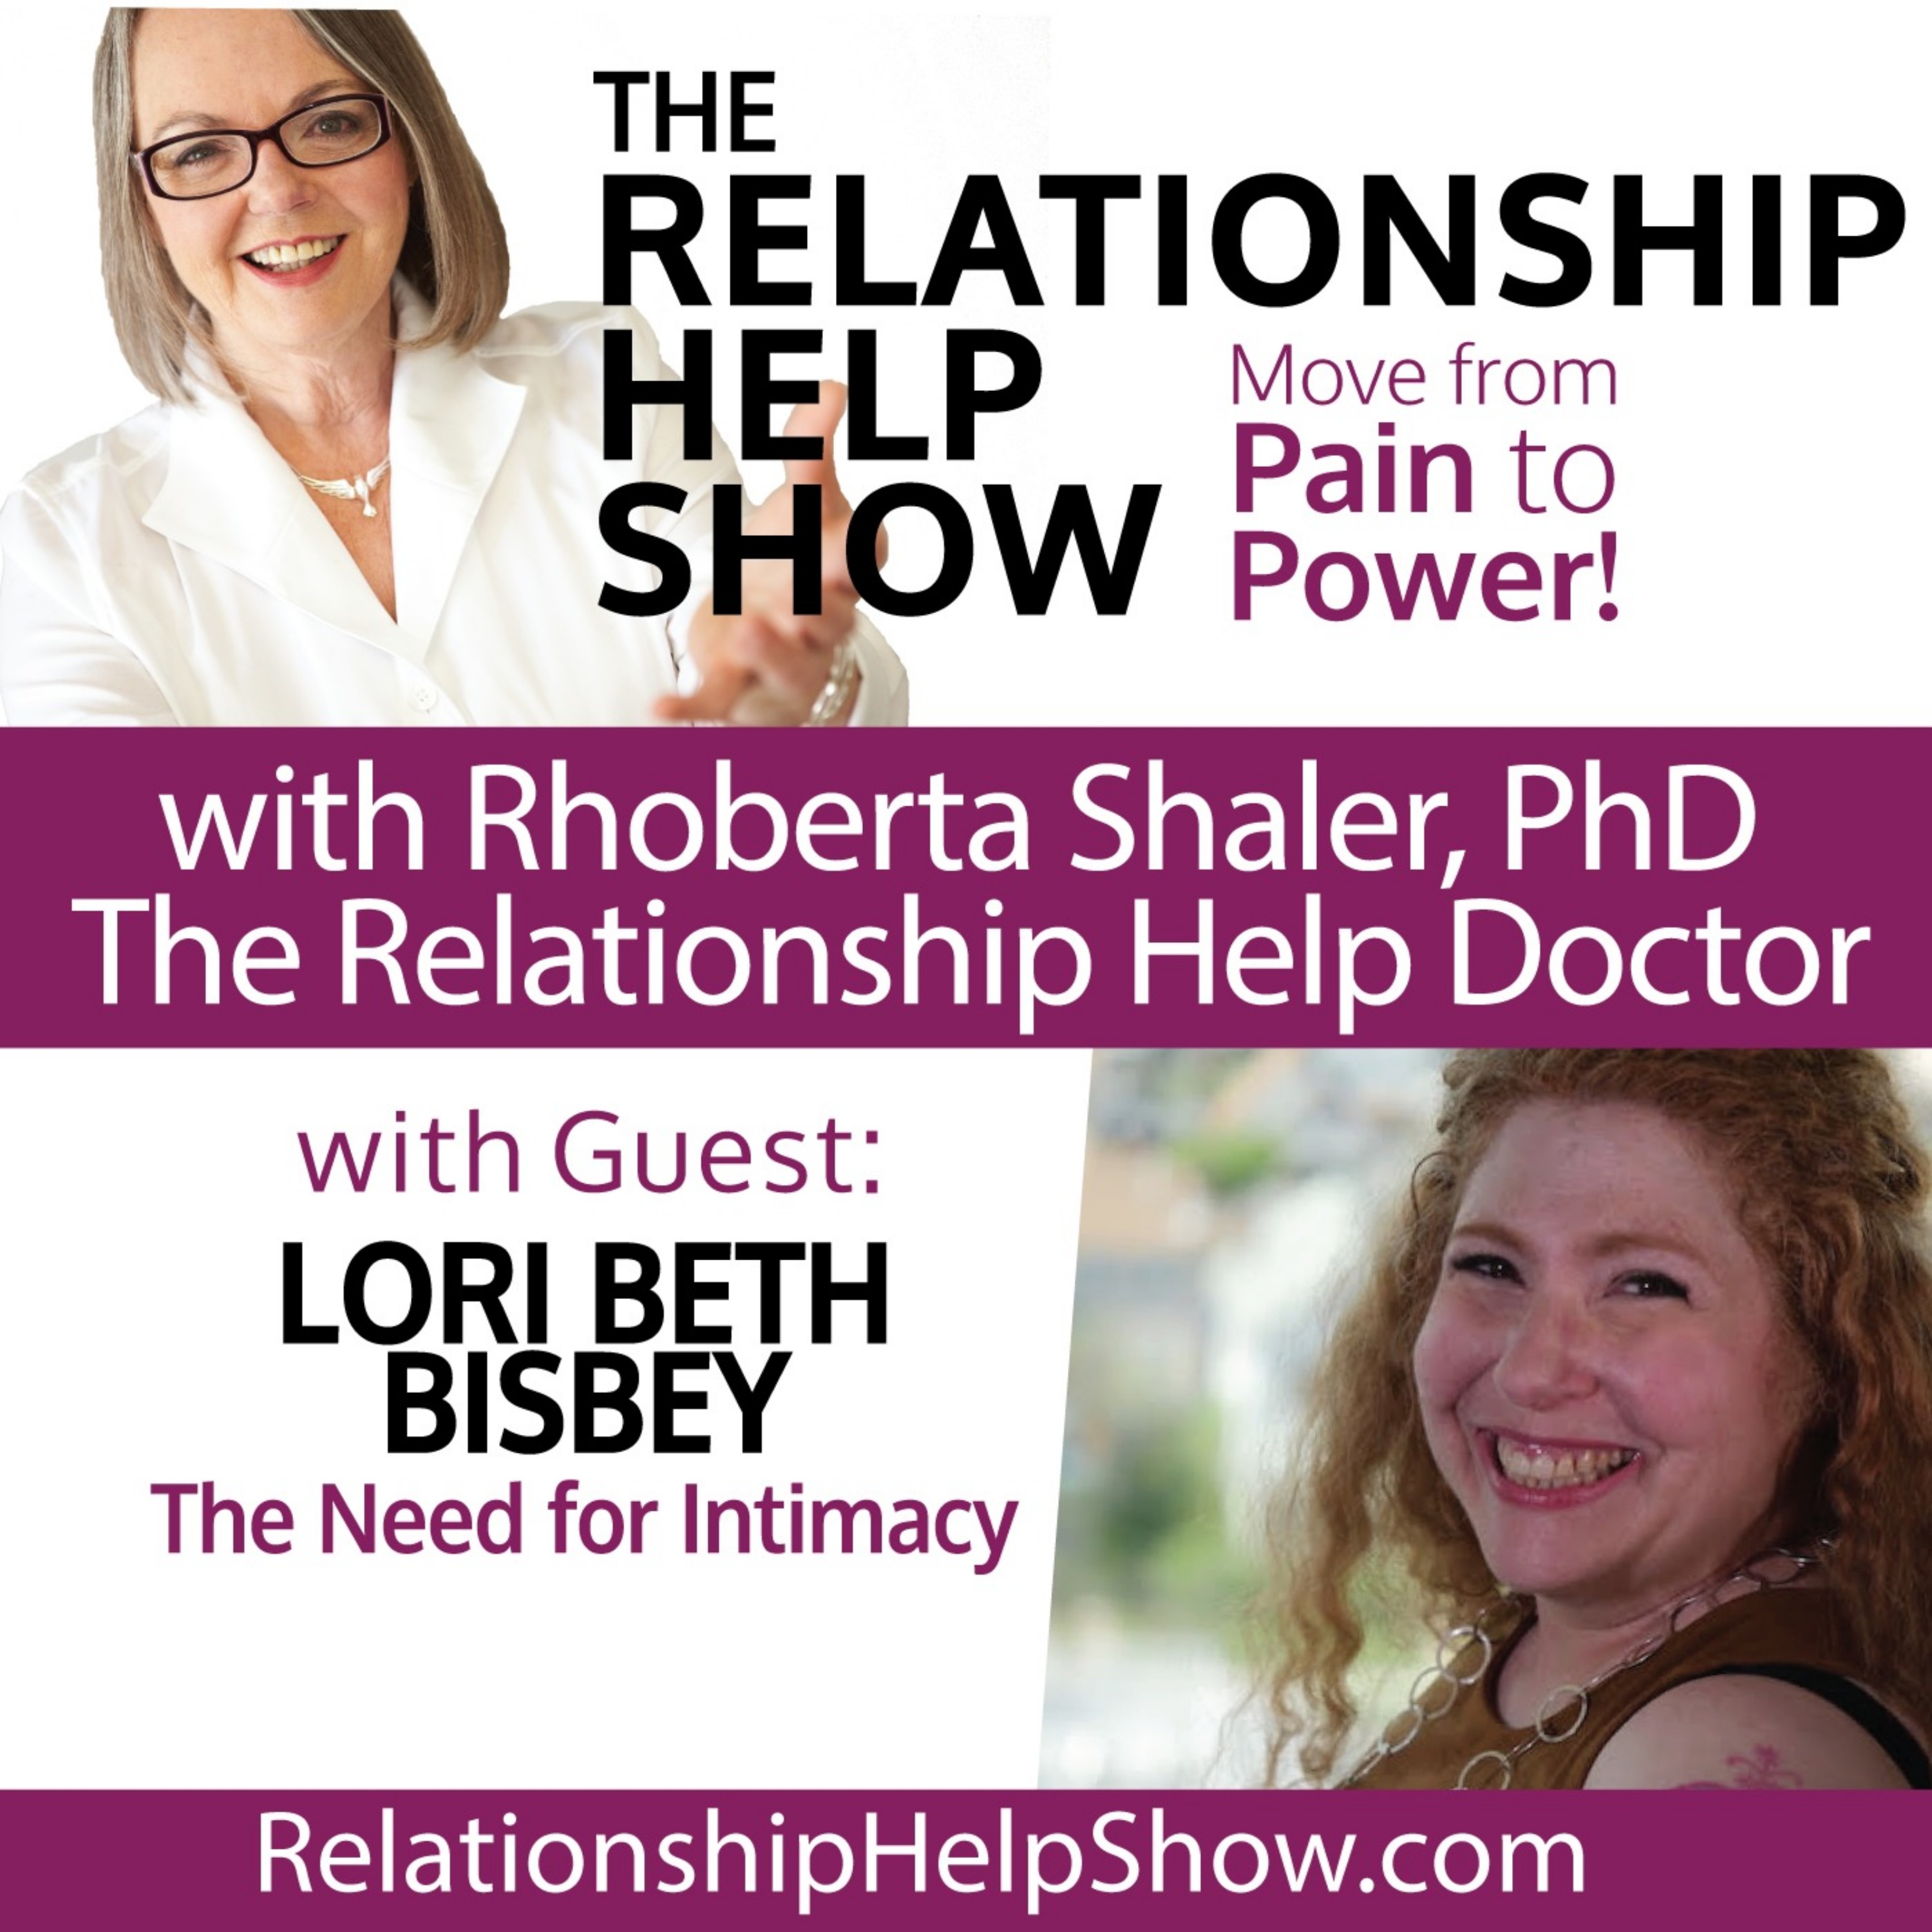 The Need for Intimacy   Guest: Dr. Lori Beth Bisbey